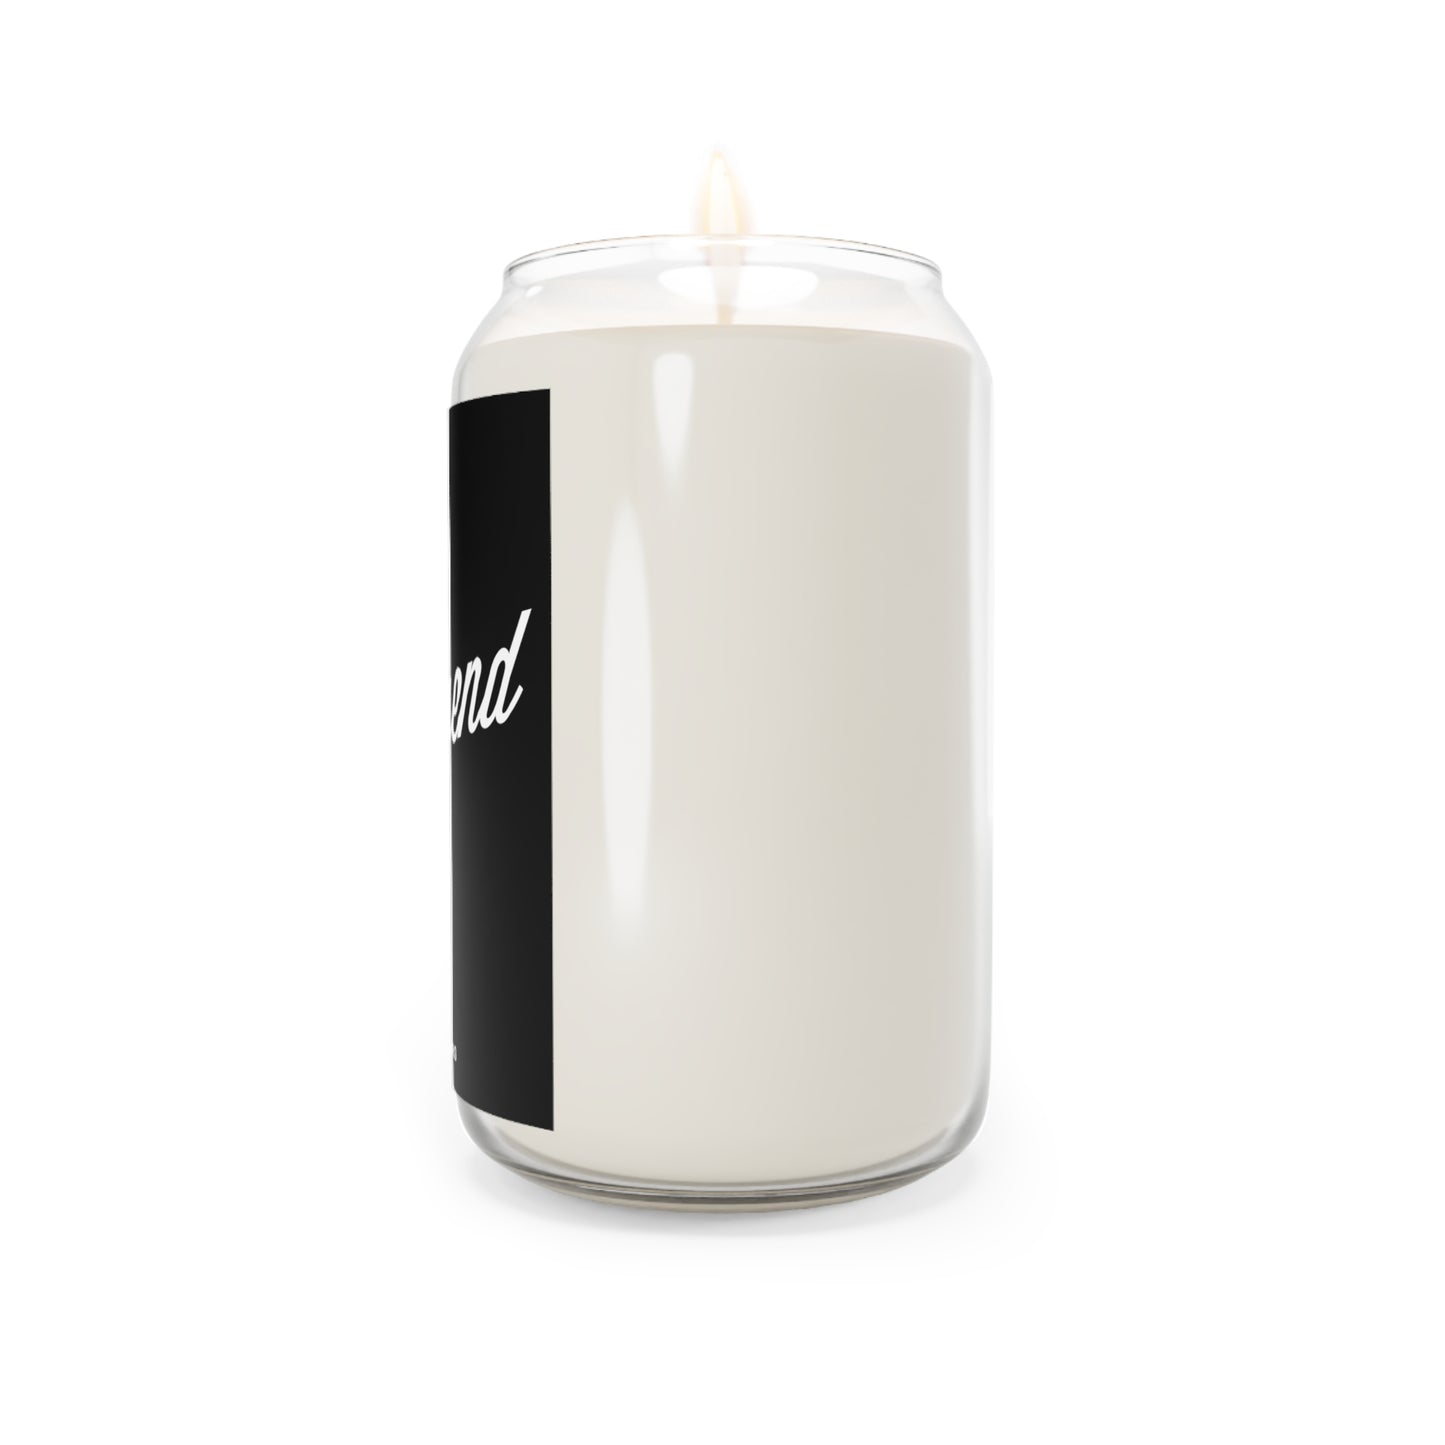 Gravesend Scented Candle, 13.75oz - Black